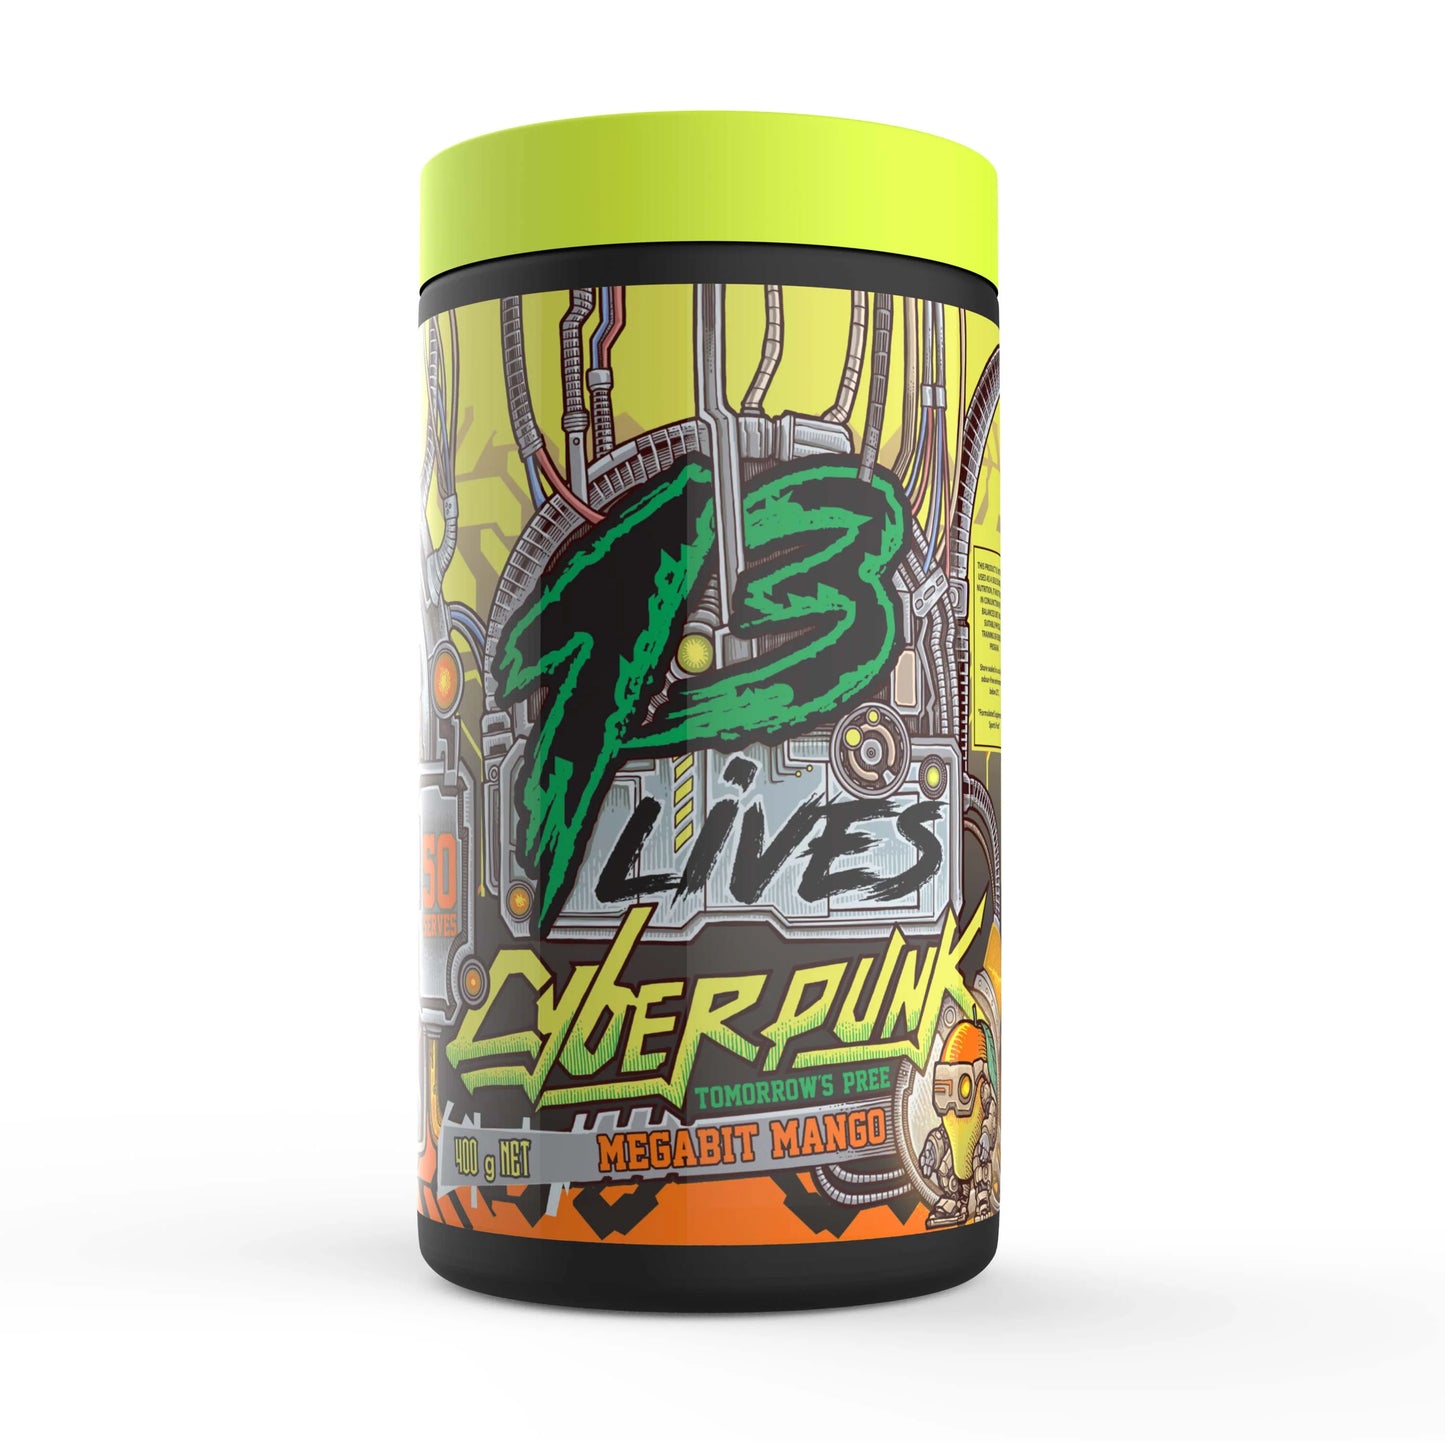 13 Lives Cyber Punk 400g, Pump Energy & Focus {Elevate Your Training With A Preworkout}